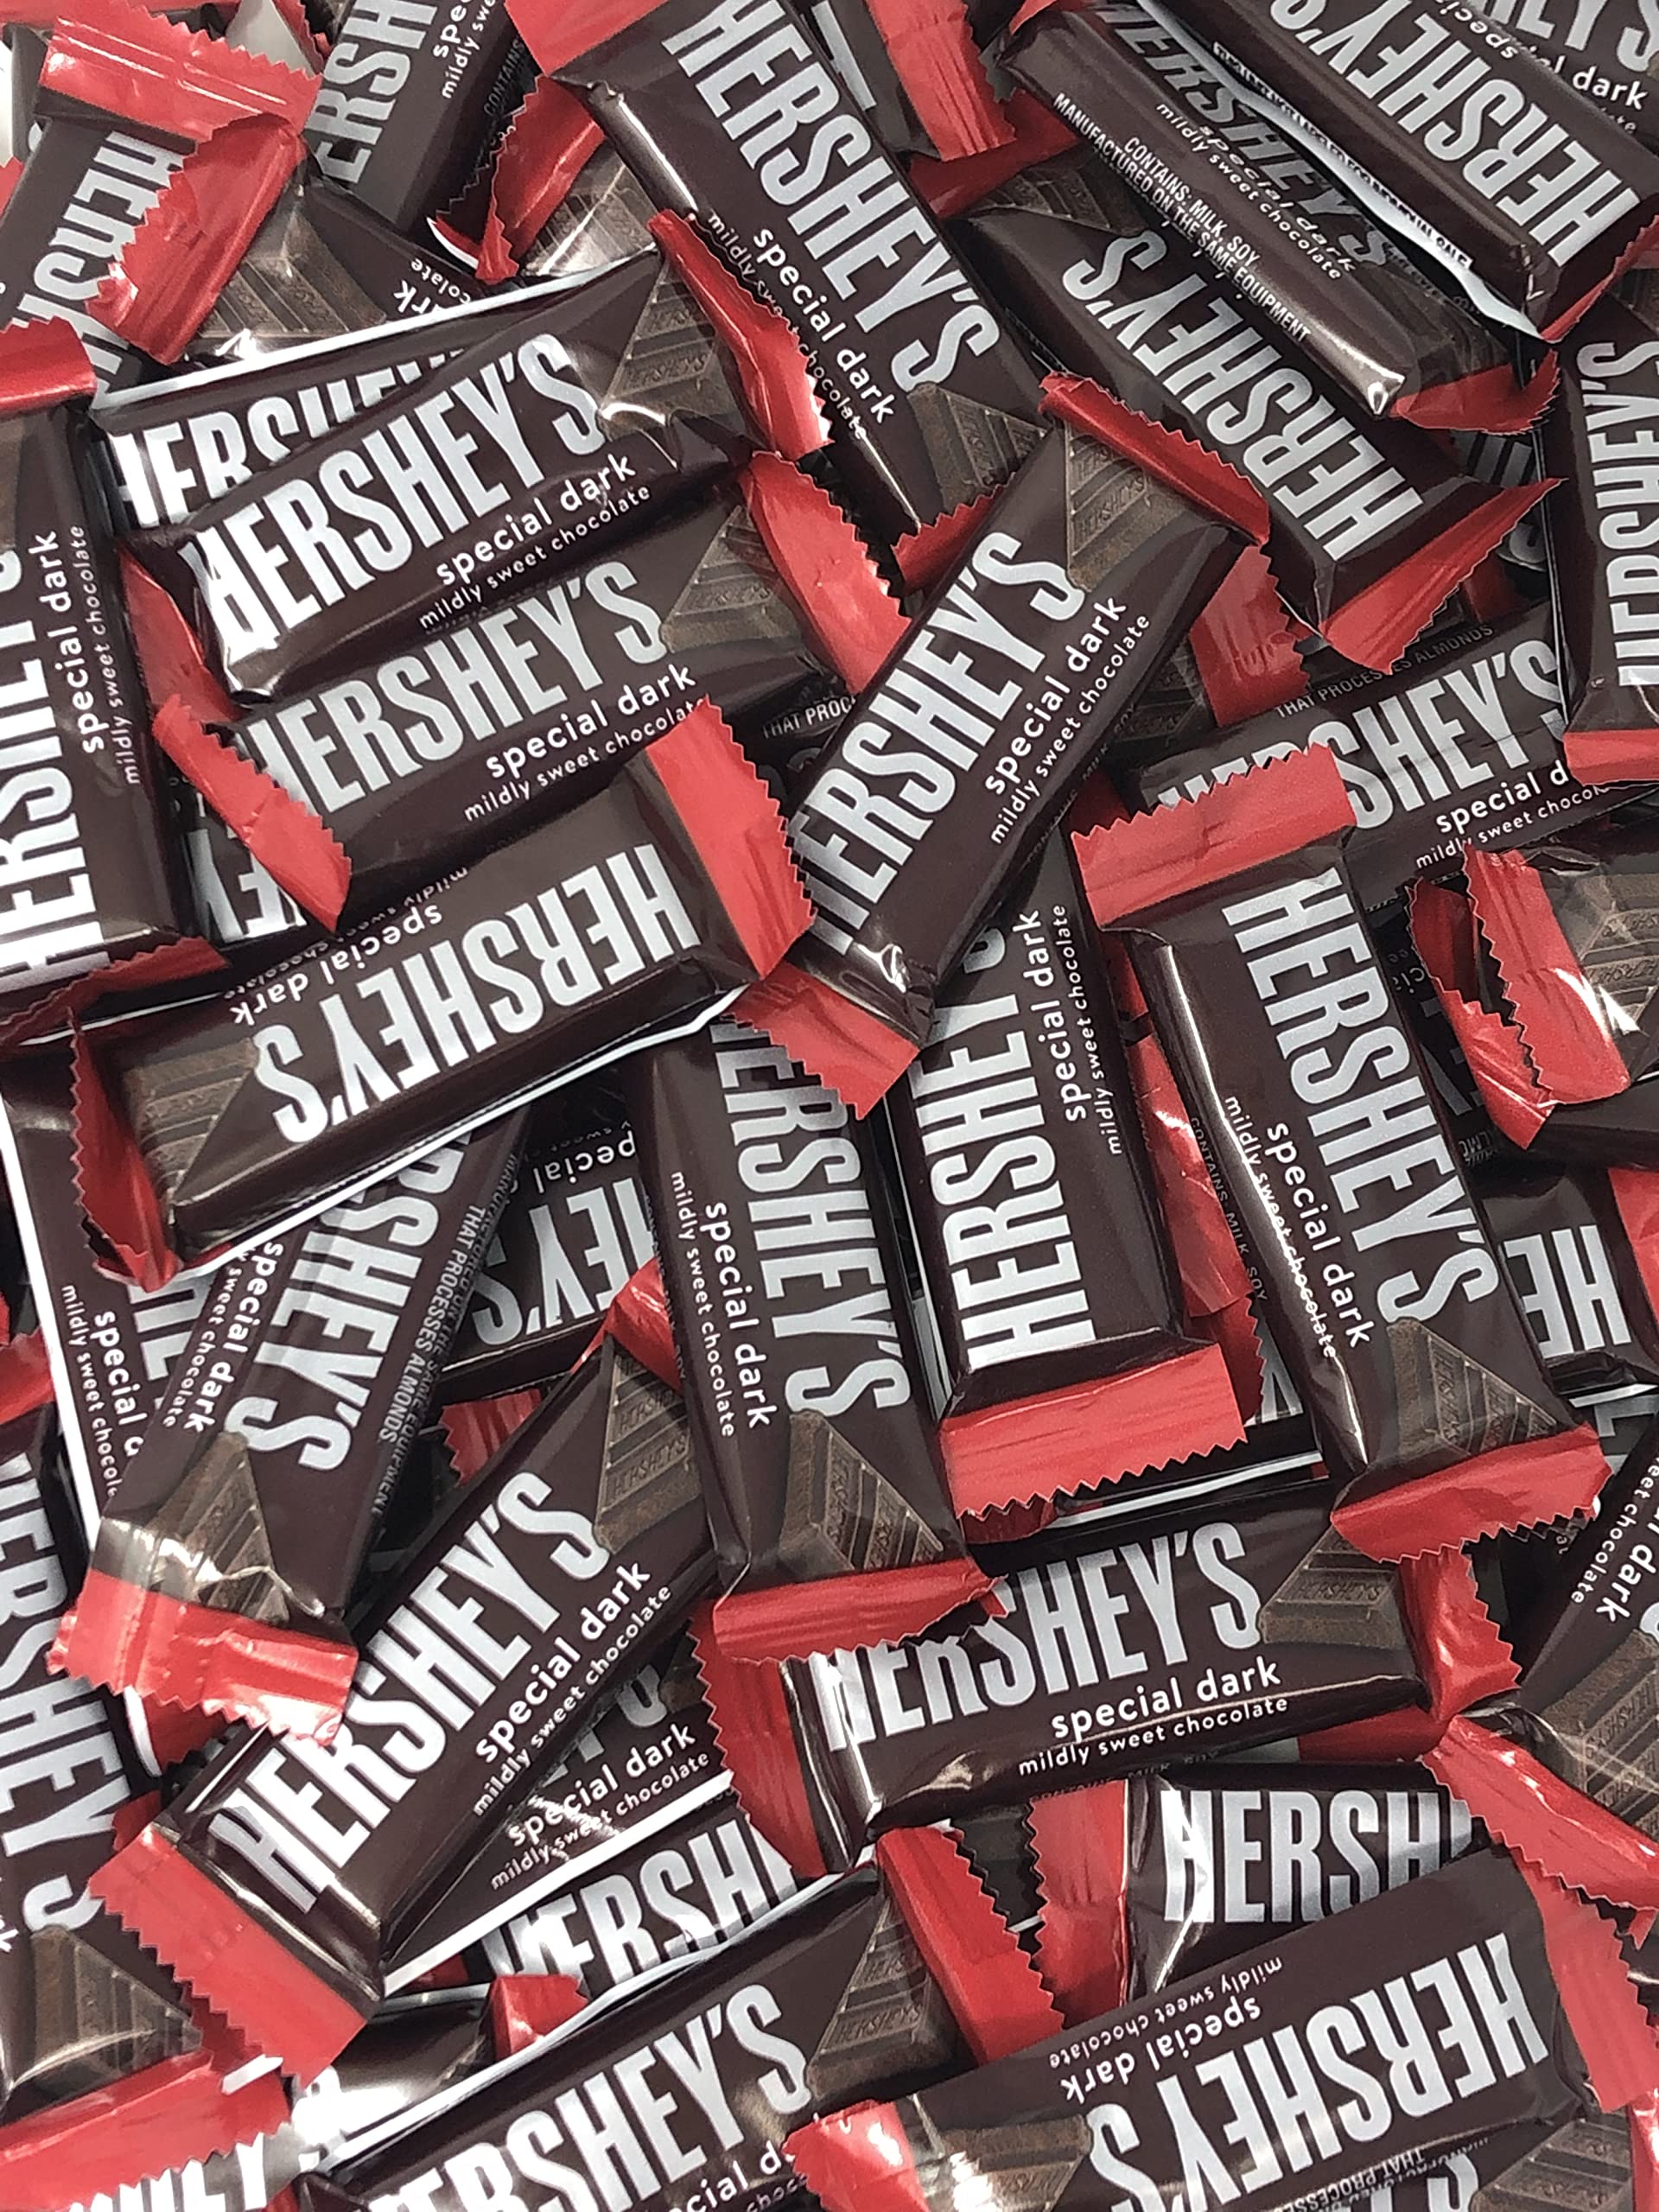 Hershey's Special Dark Chocolate Bars, Snack Size Dark Mildly Sweet Chocolate Bar Candy, Bulk Pack Of 5 Pounds